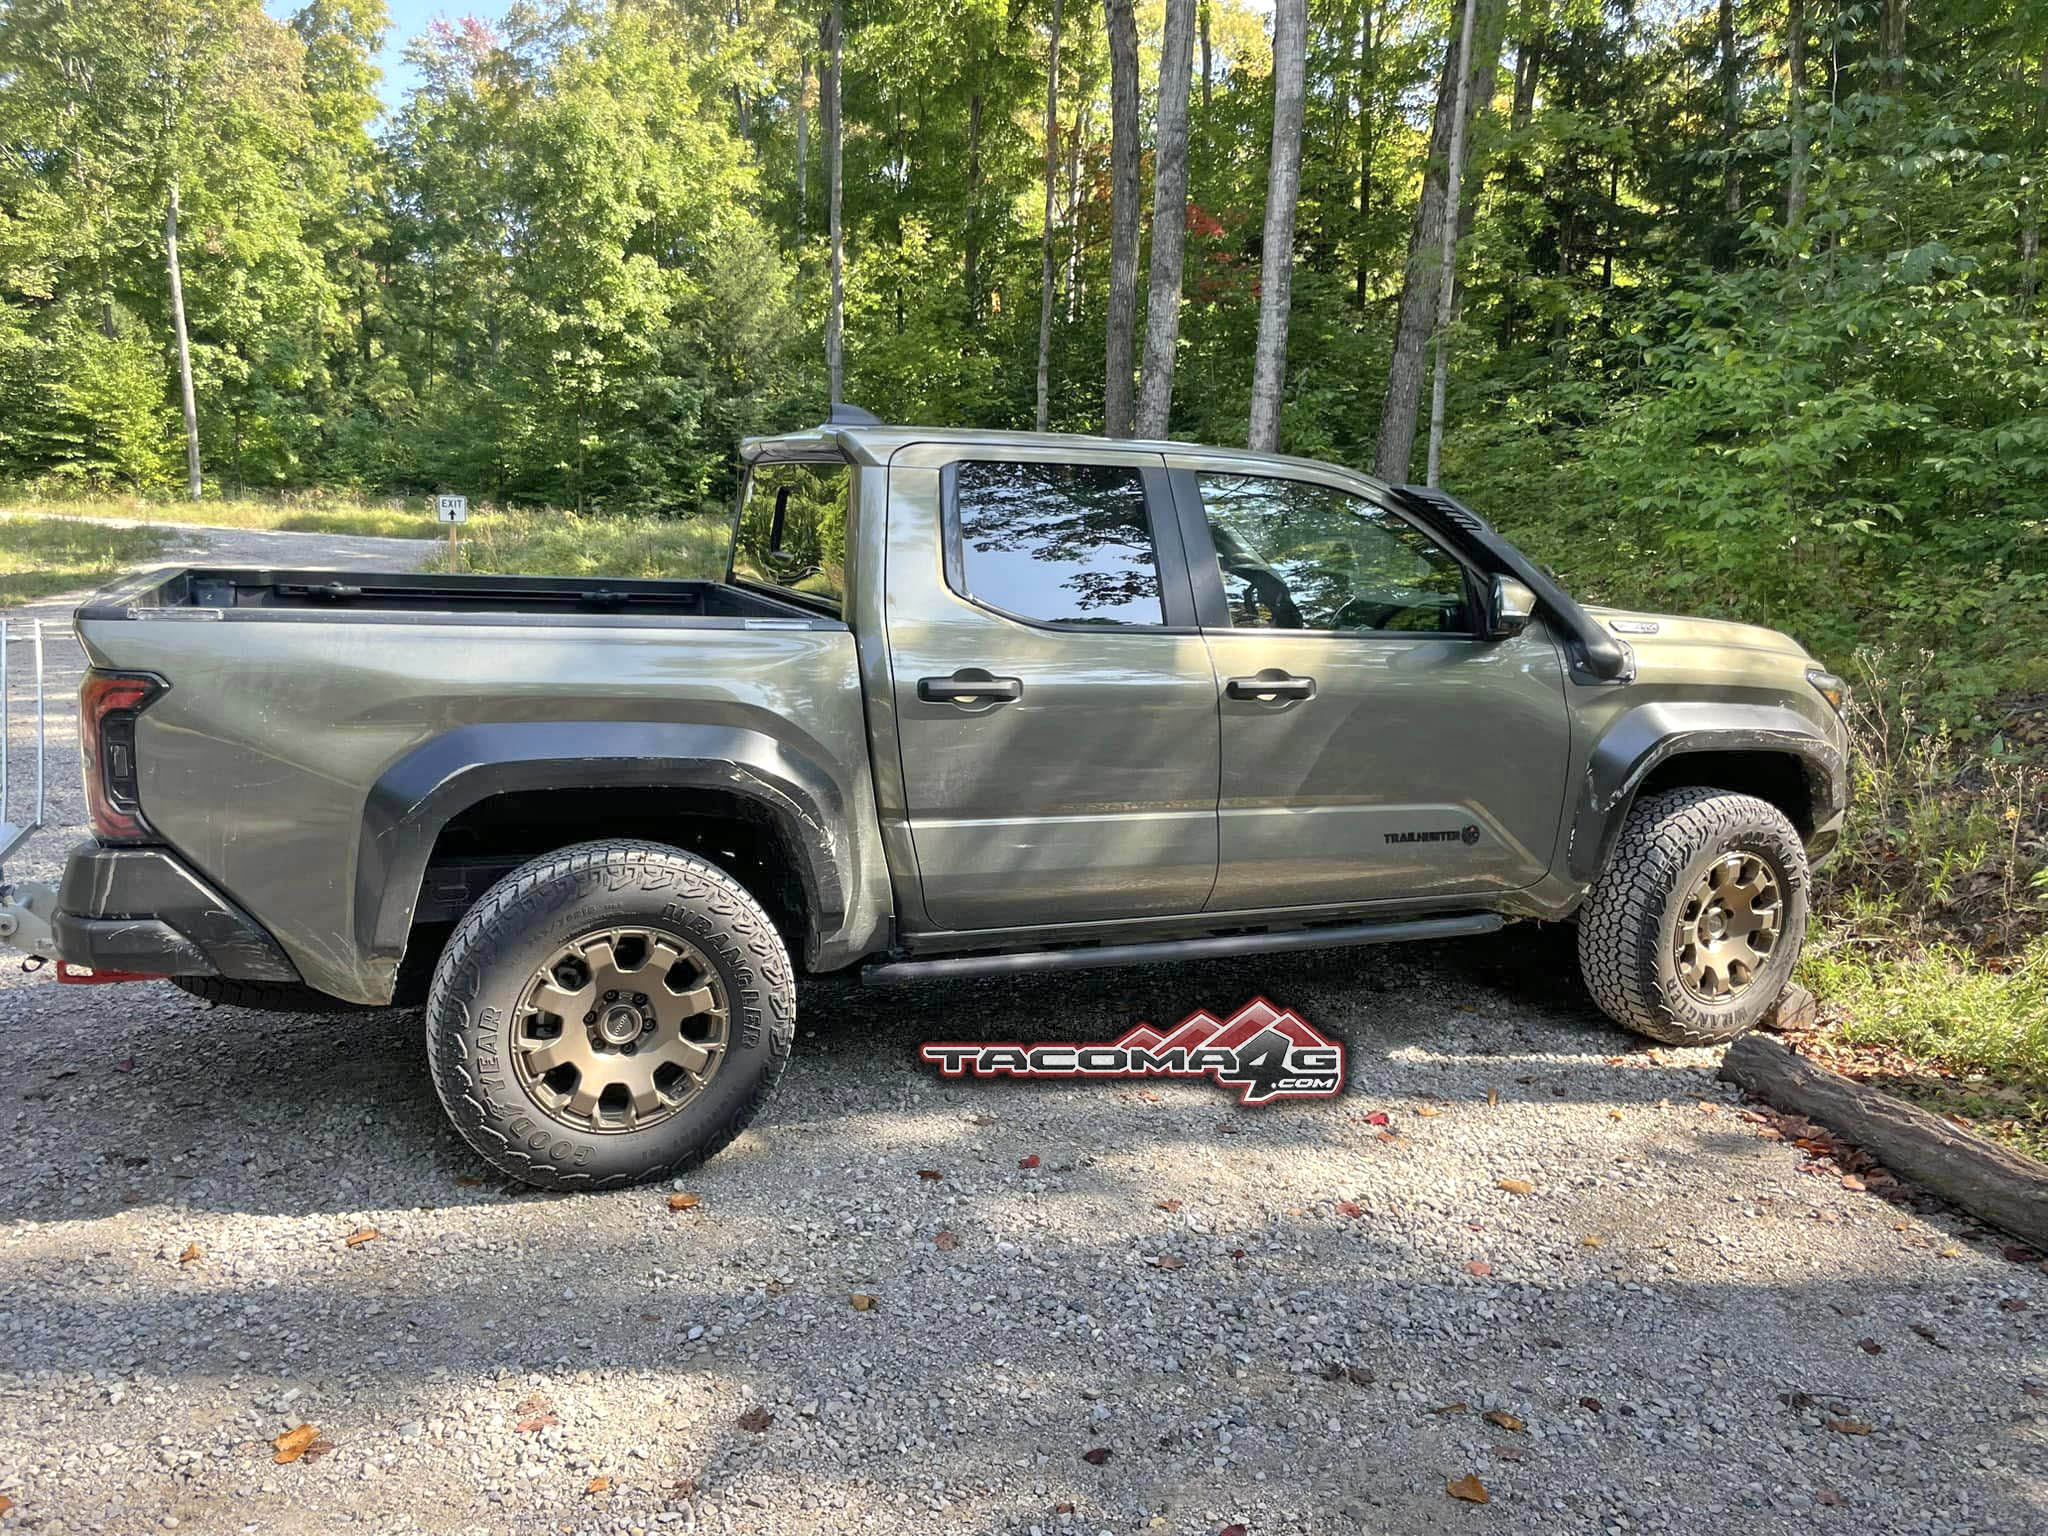 2024 Tacoma Short Bed (5' Foot) 2024 Tacoma first sighting! (Bronze Oxide Trailhunter spotted in wild) 5 foot Short Bed 2024 Toyota Tacoma Trail hunter Bronze Oxide 4